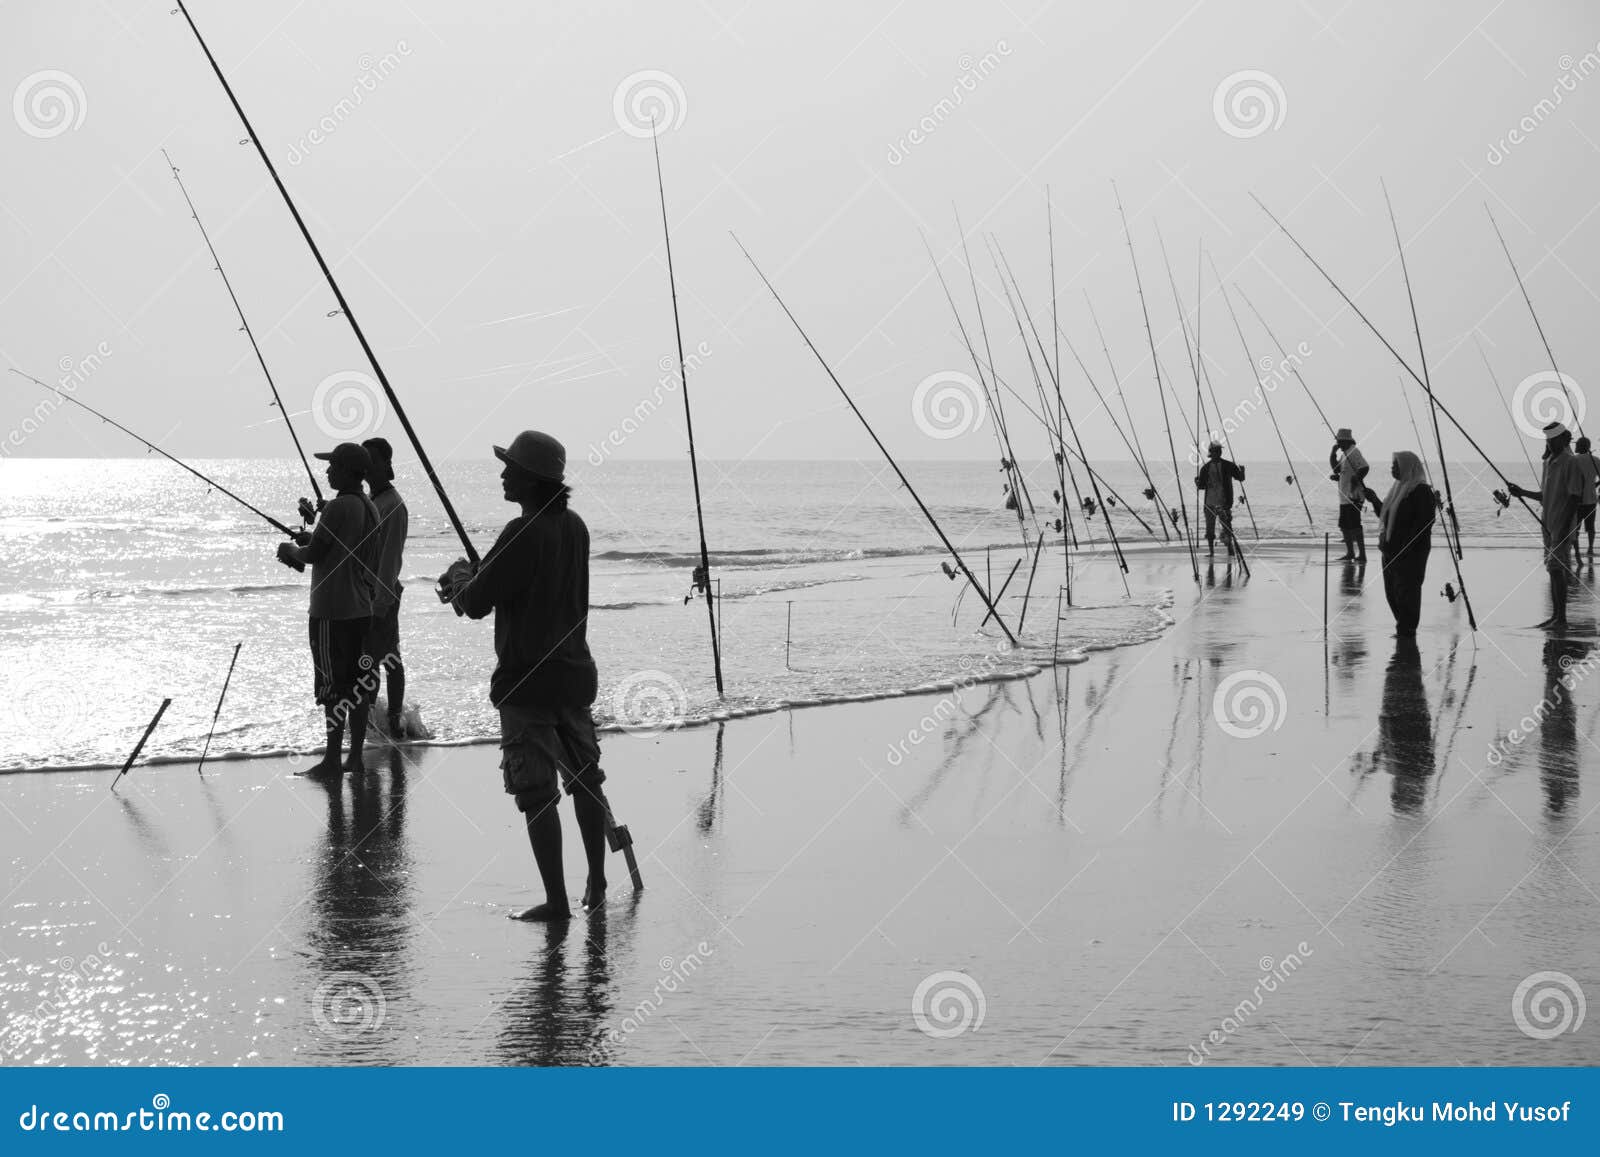 Fishing Play: Over 17,437 Royalty-Free Licensable Stock Photos